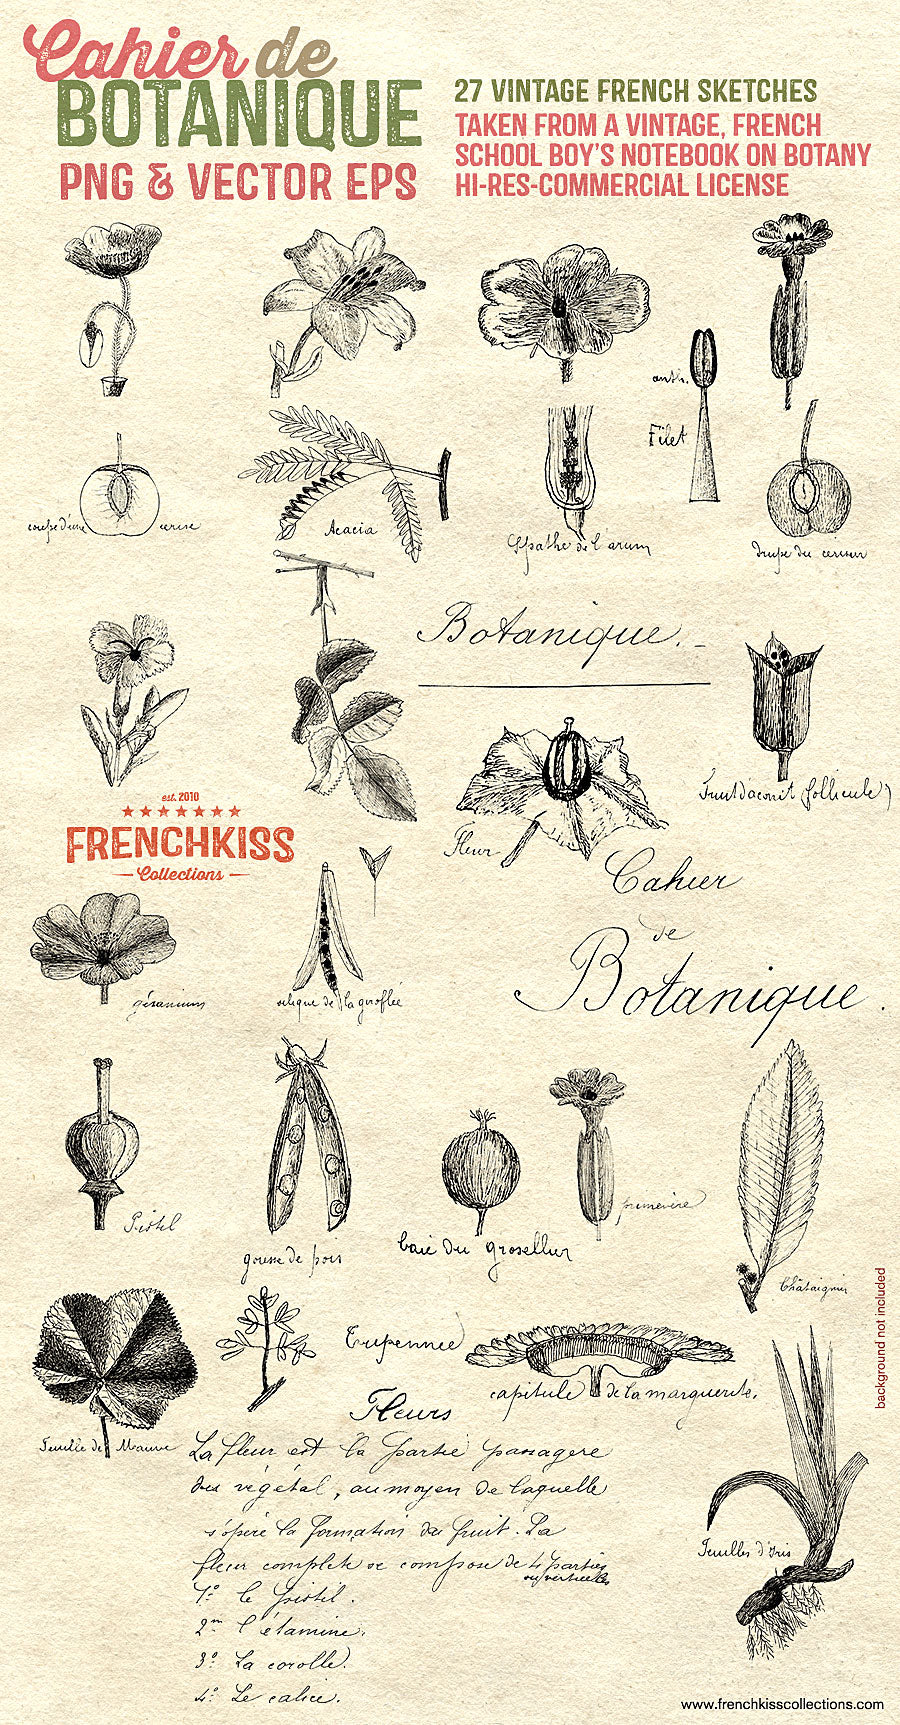 Vintage French overlays and vector eps from a school boy&#39;s sketches and notes on botany.